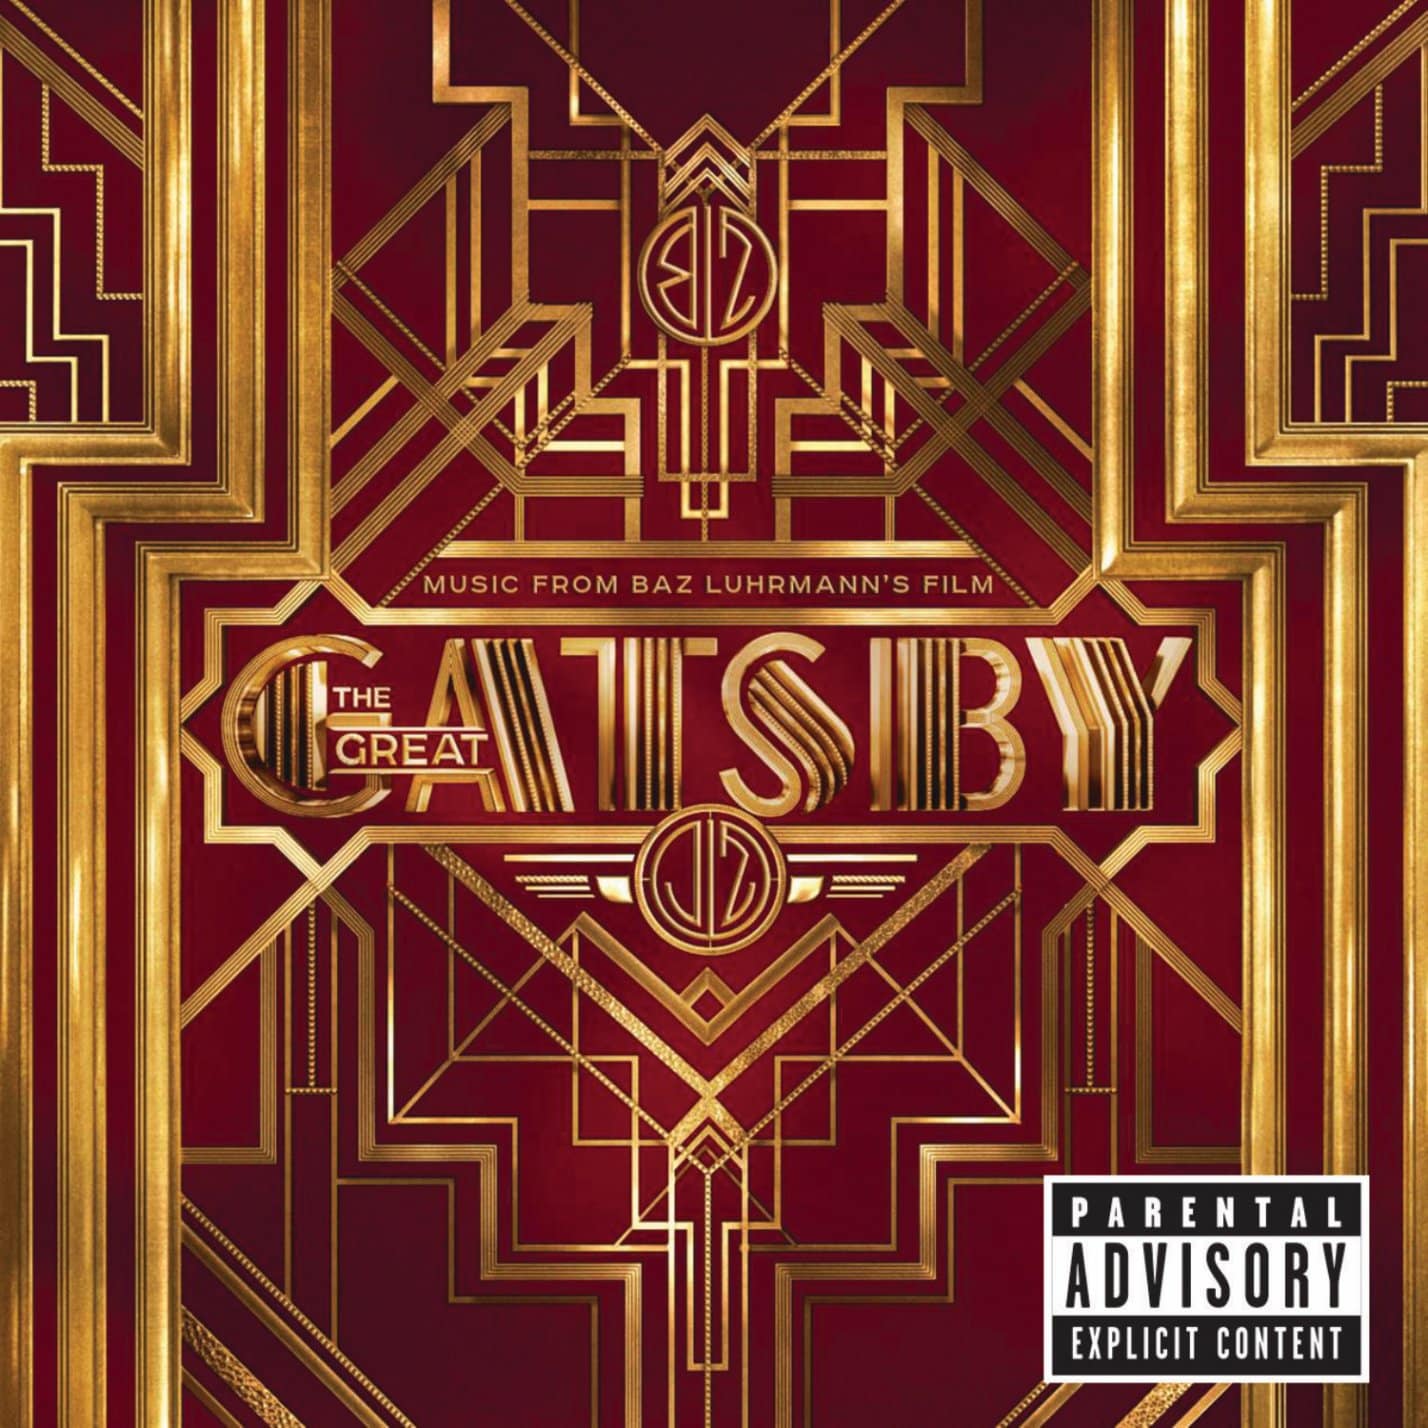 Soundtrack album cover for The Great Gatsby in crimson and gold intricate geometric designs.